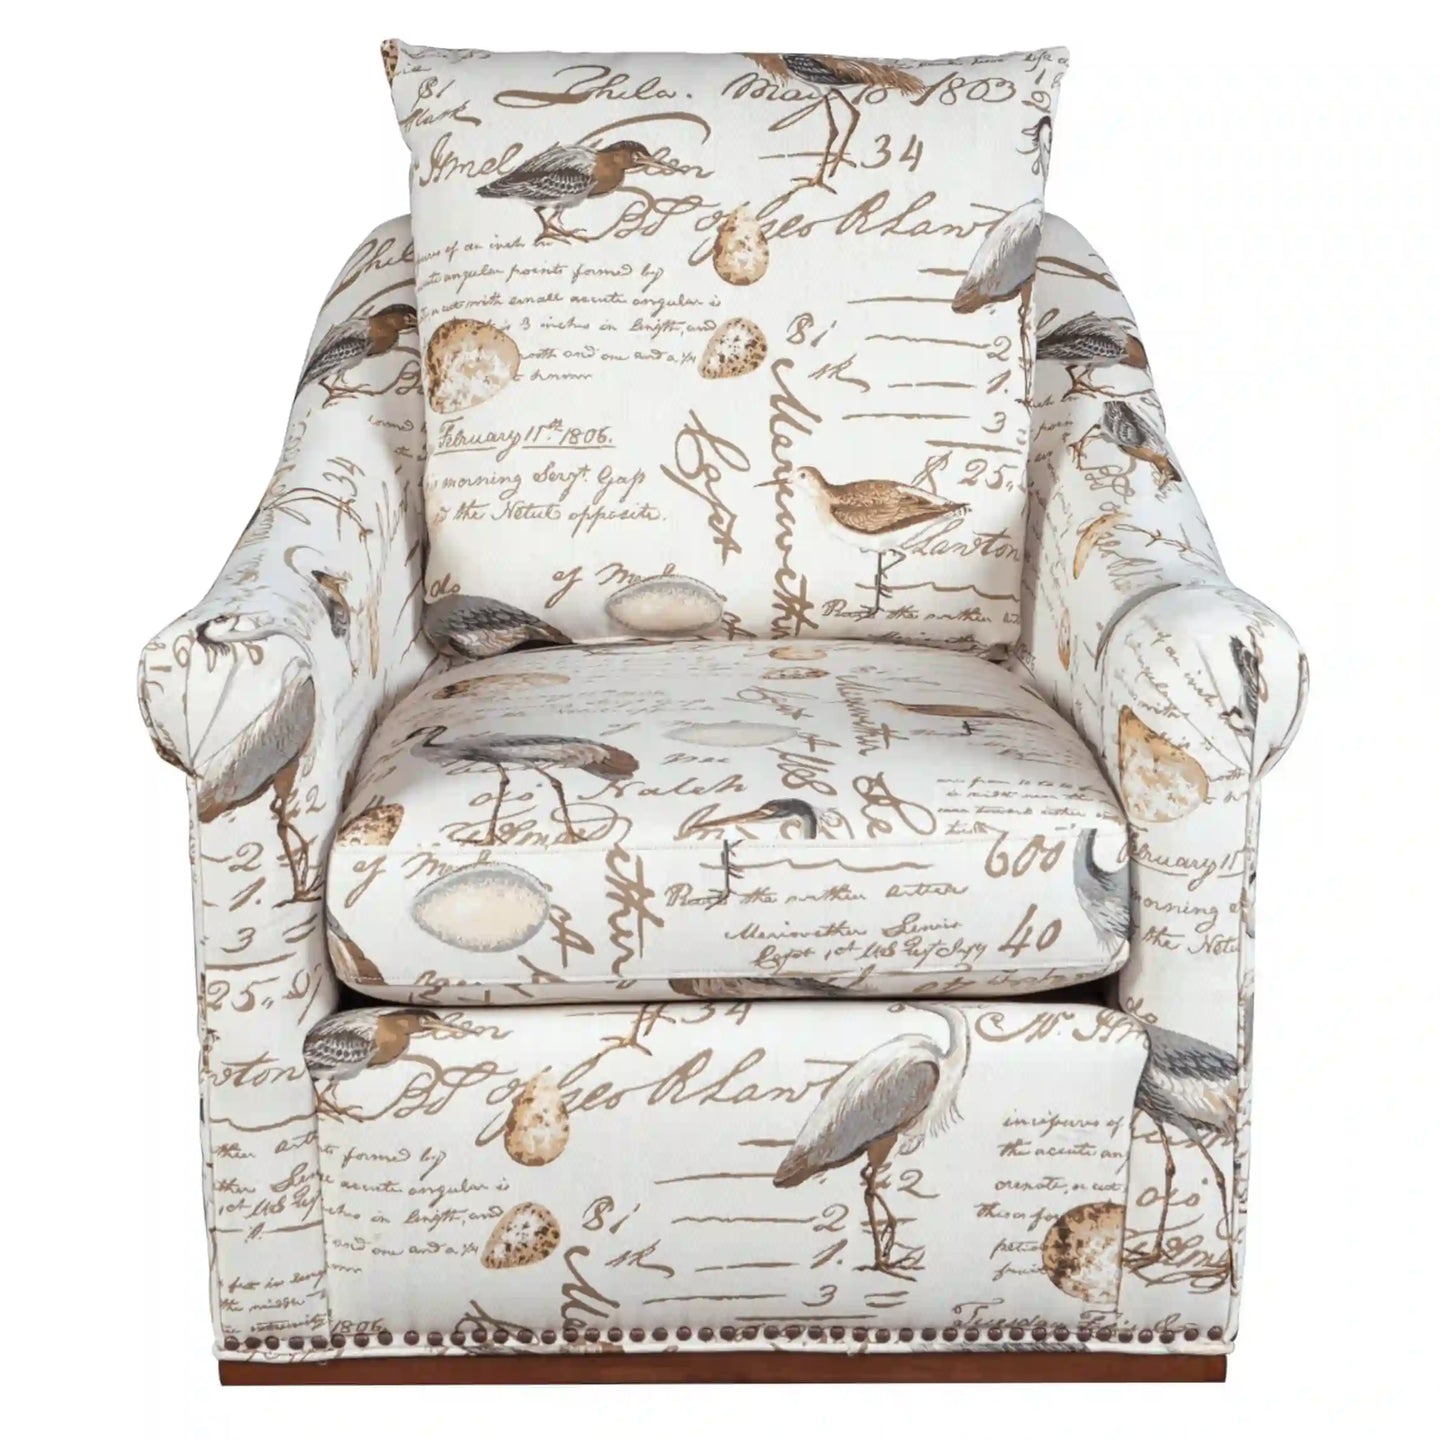 Sunset Trading Birdscript Swivel Chair | Low Back | Rolled Arms | Nailhead Trim